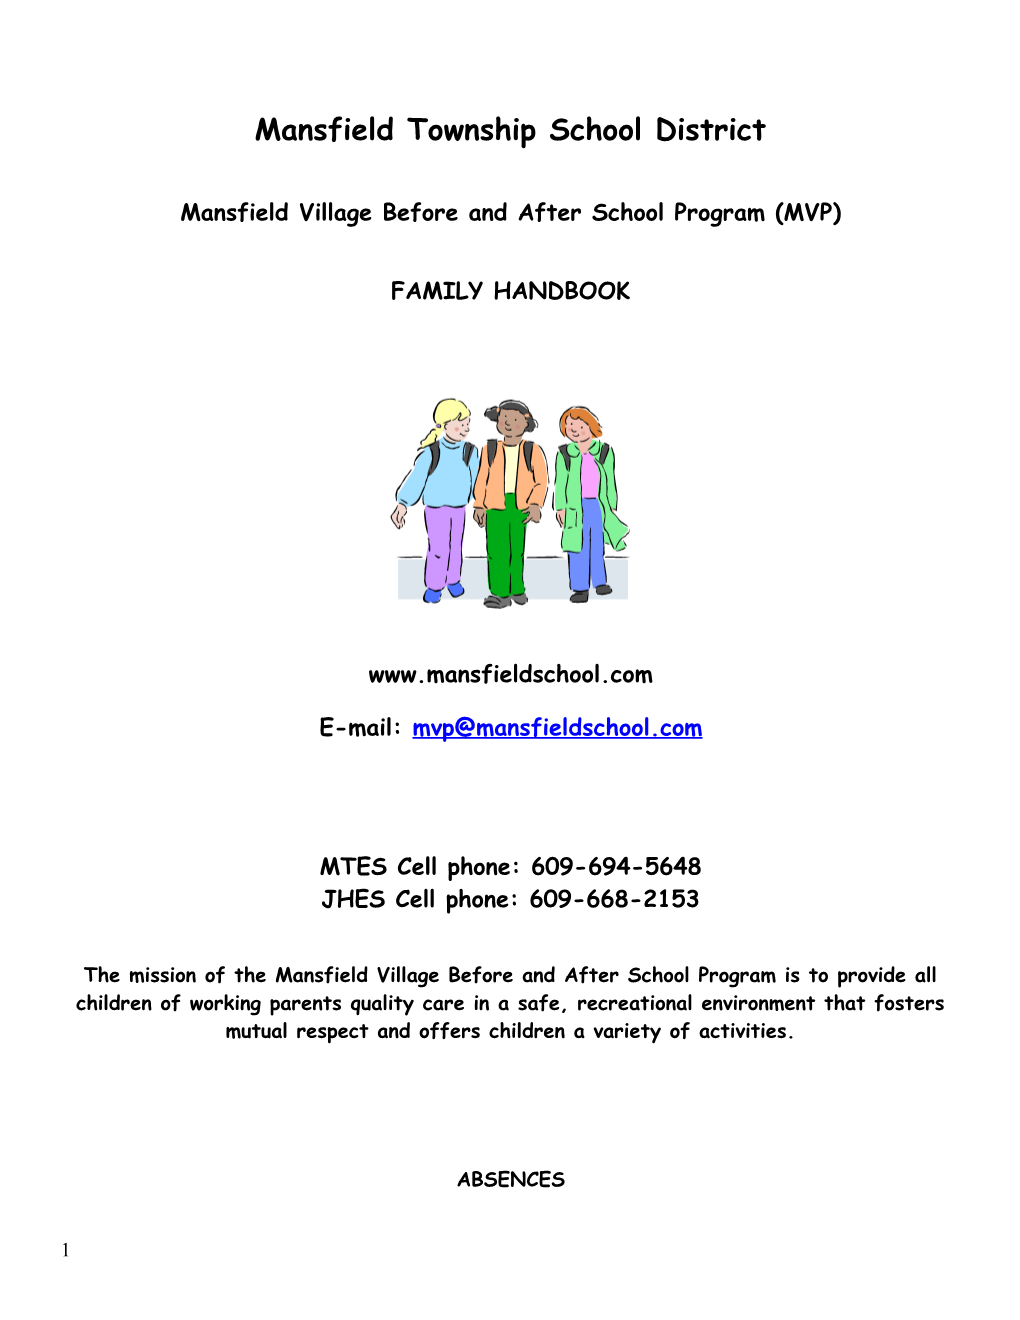 Mansfield Village Before and After School Program (MVP)